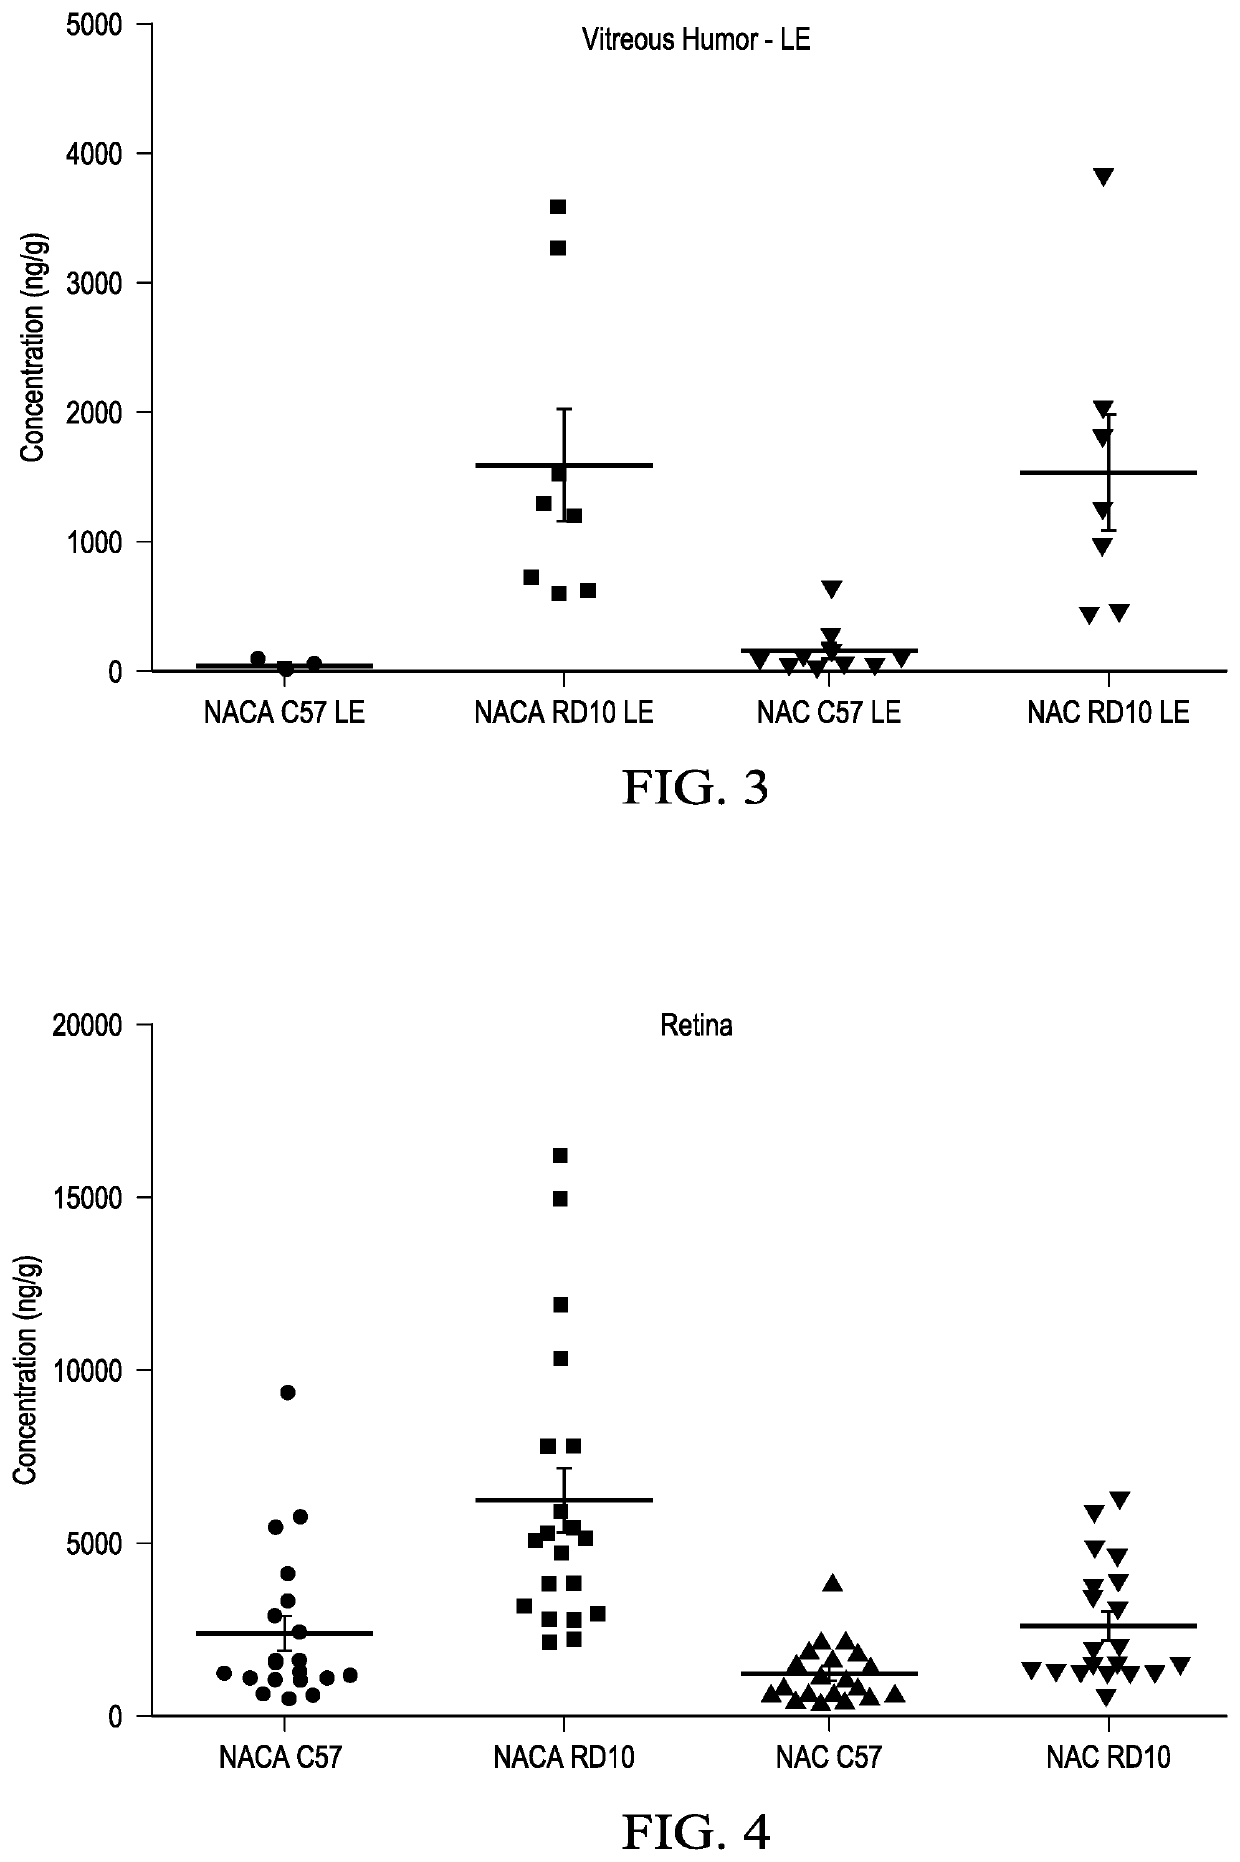 Treatment of Age-Related Macular Degeneration, Glaucoma, and Diabetic Retinopathy with N-Acetylcysteine Amide (NACA) or (2R,2R')-3,3'-Disulfanediyl BIS(2-Acetamidopropanamide)(DiNACA)